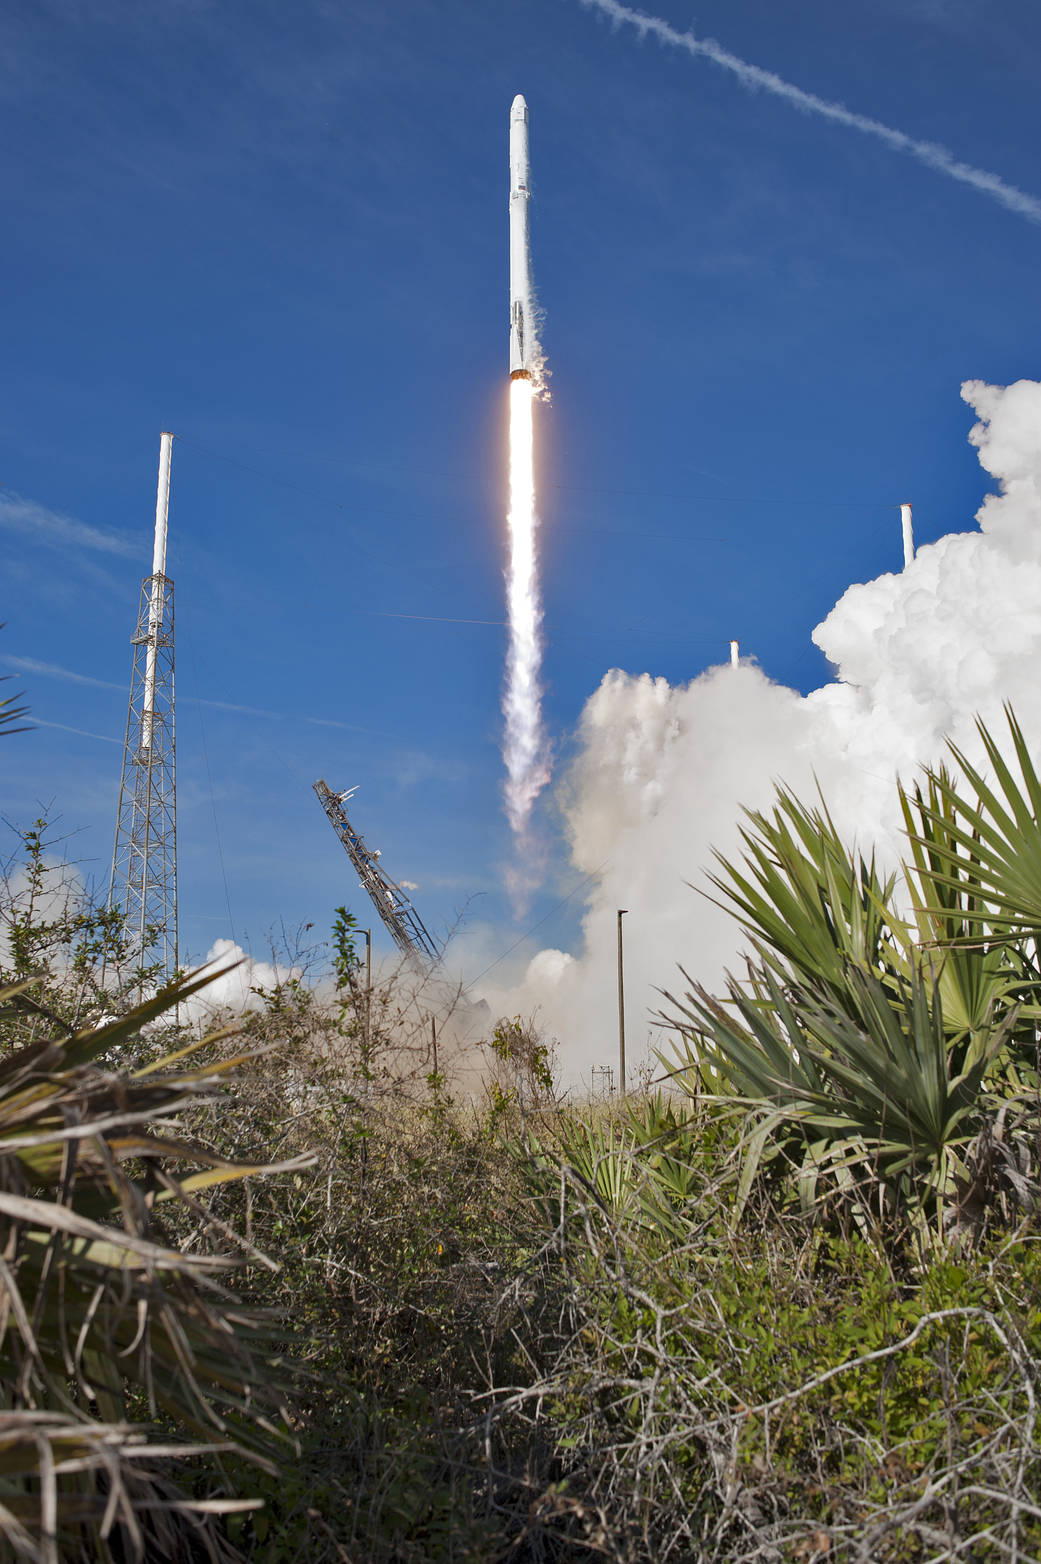 Liftoff of SpaceX rocket from Cape Canaveral